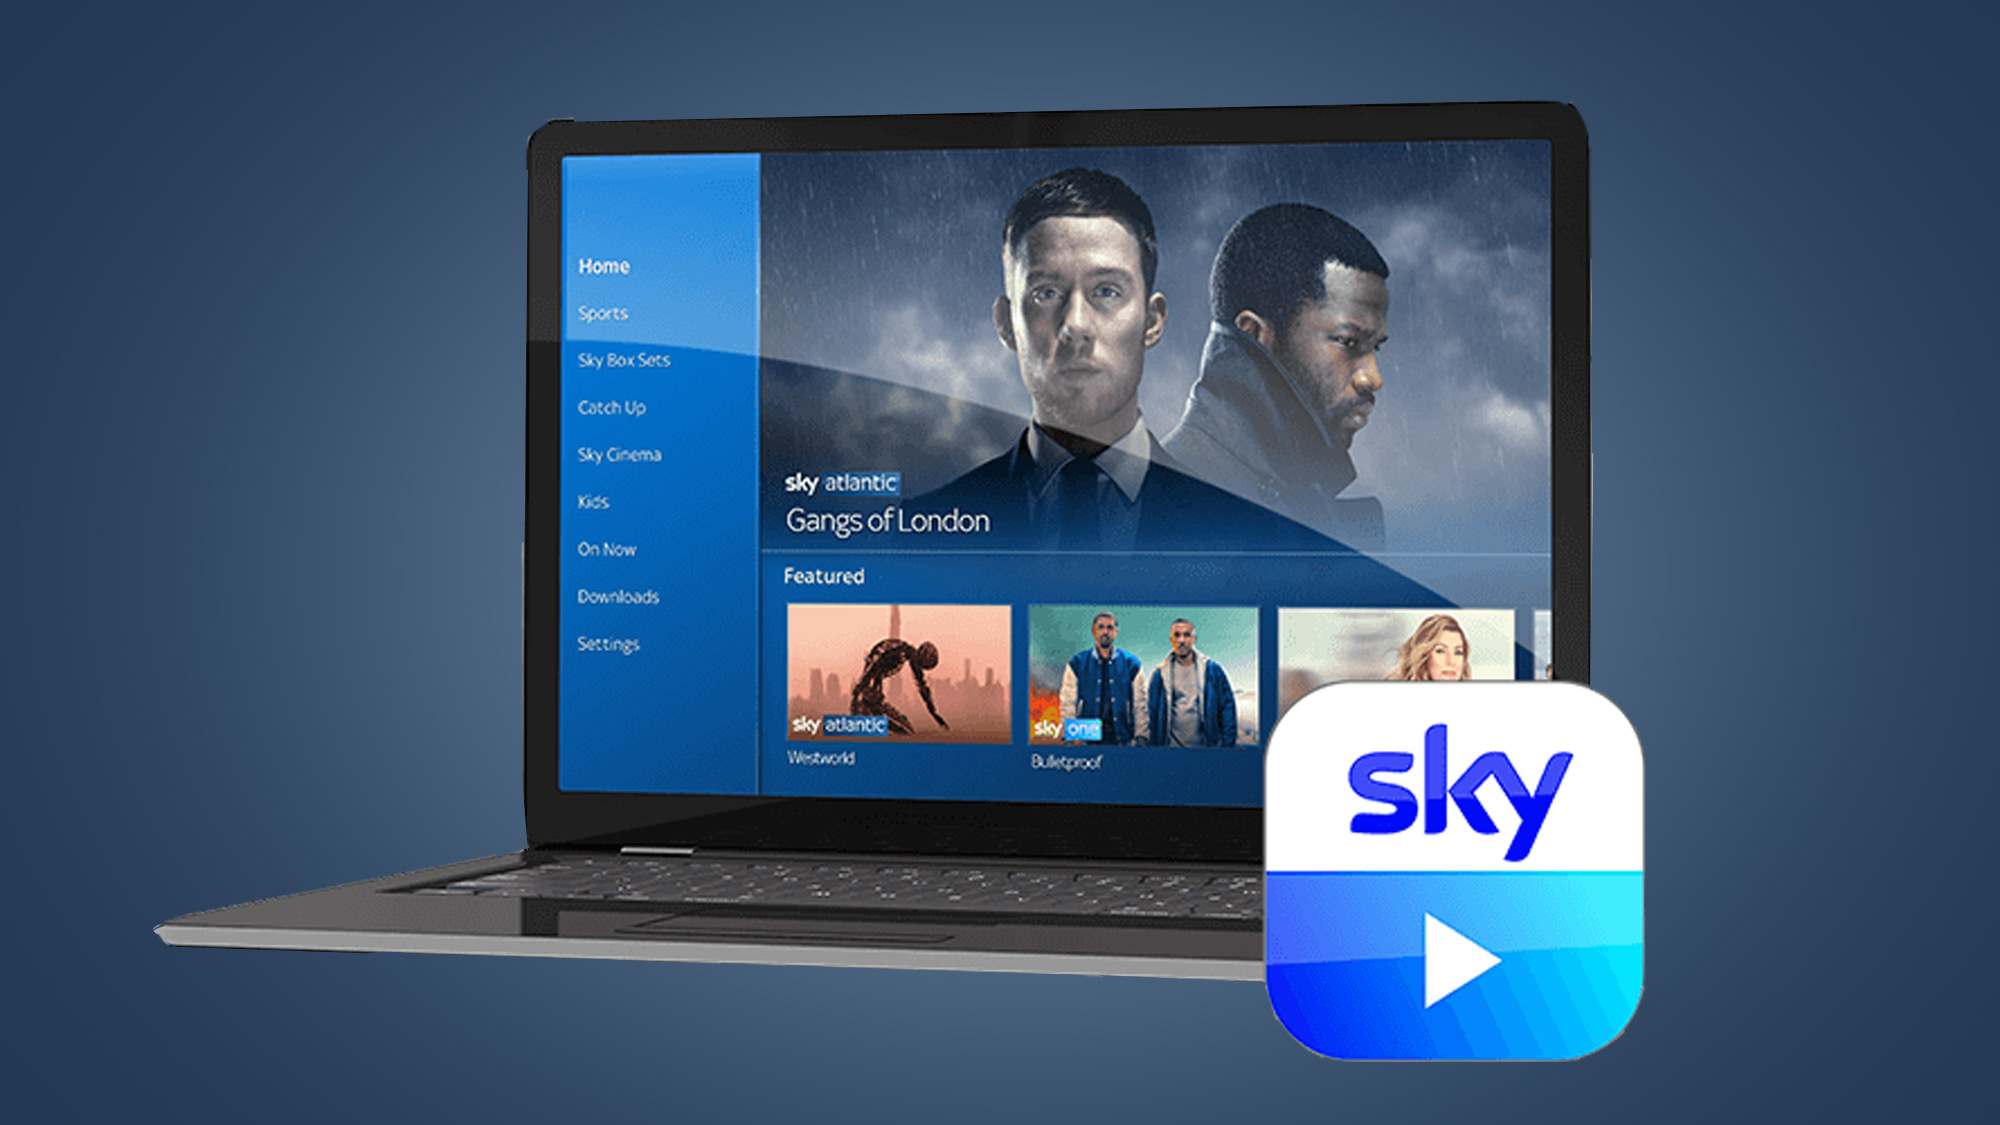 How to Get Sky App and Use It? 1